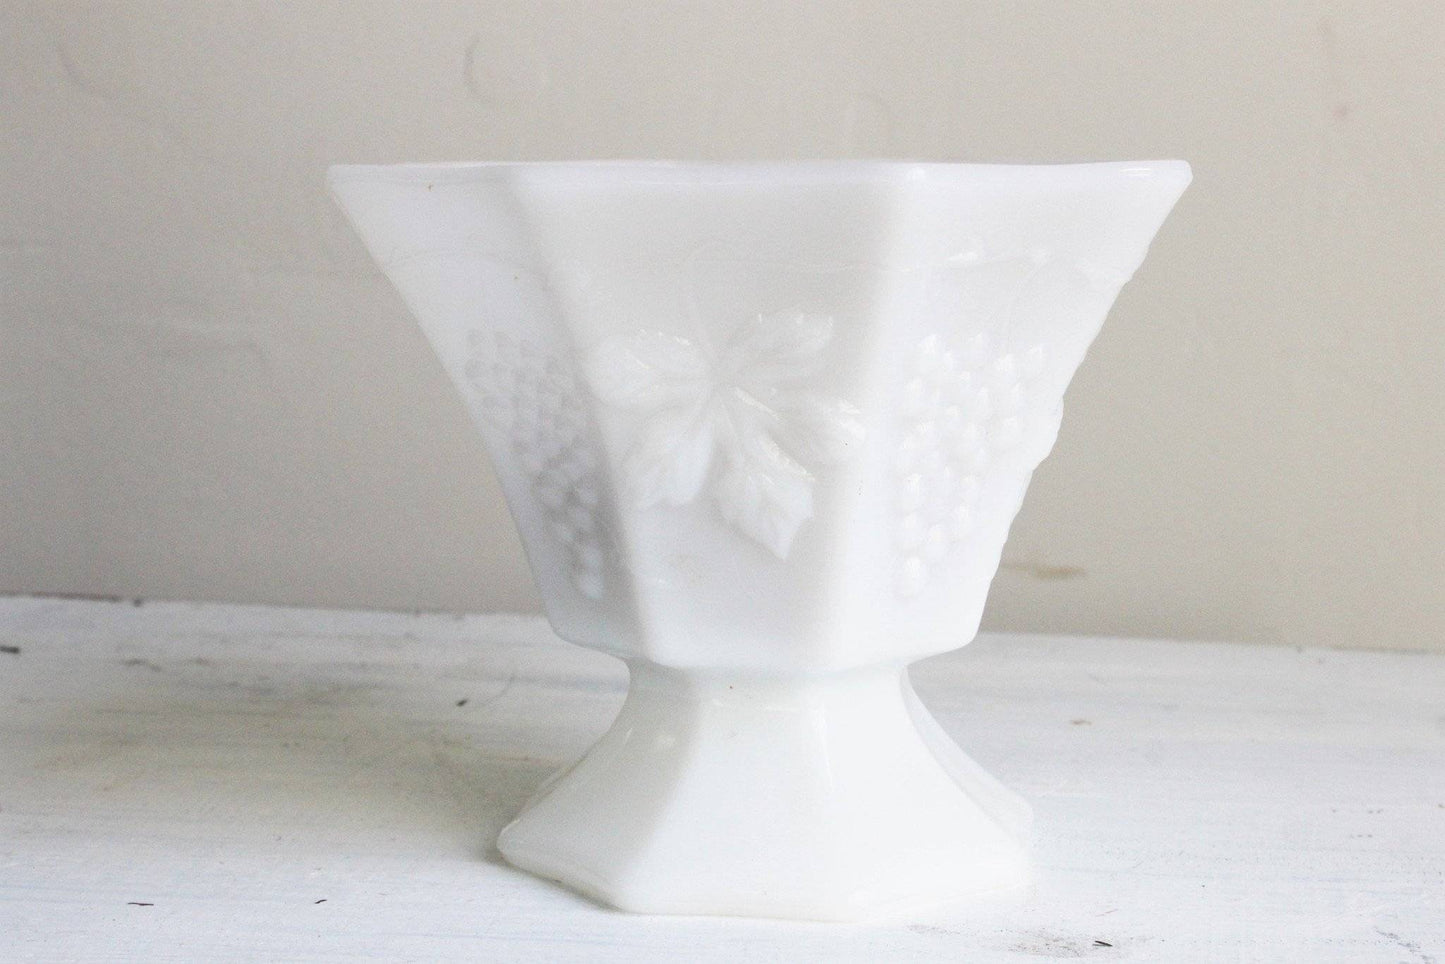 Vintage Mid Century Milk Glass Candy Dish,Grapevine Milkglass-Mint Chips Vintage Home Goods-Bridal,Candy Dish,Collectible,Decor,Grapeleaf,Grapevine,Milk Glass,Milkglass,Trinket Dish,Vintage,Wedding,White